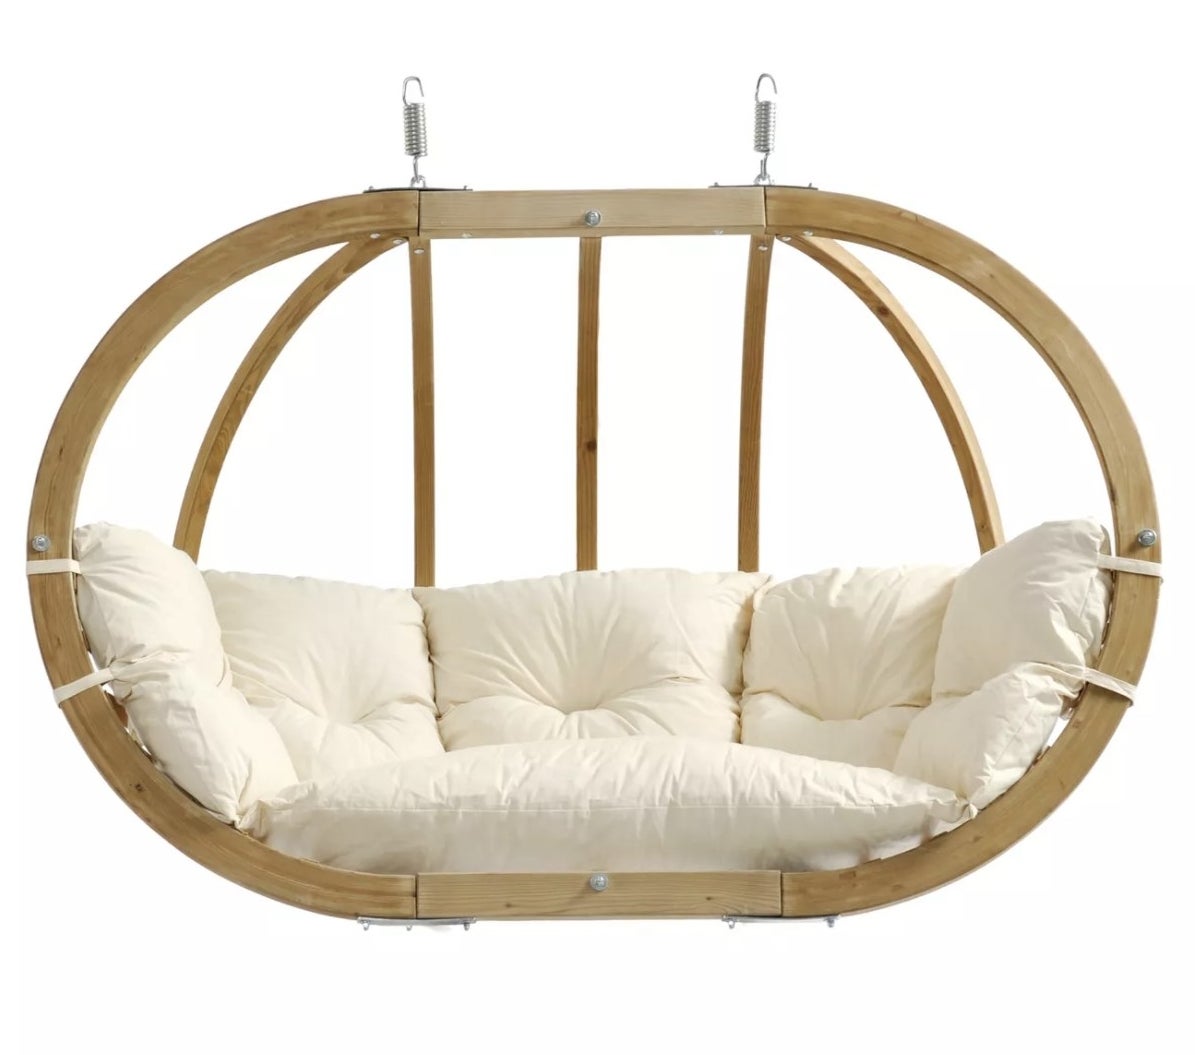 A hanging patio swing with white cushions that seats two